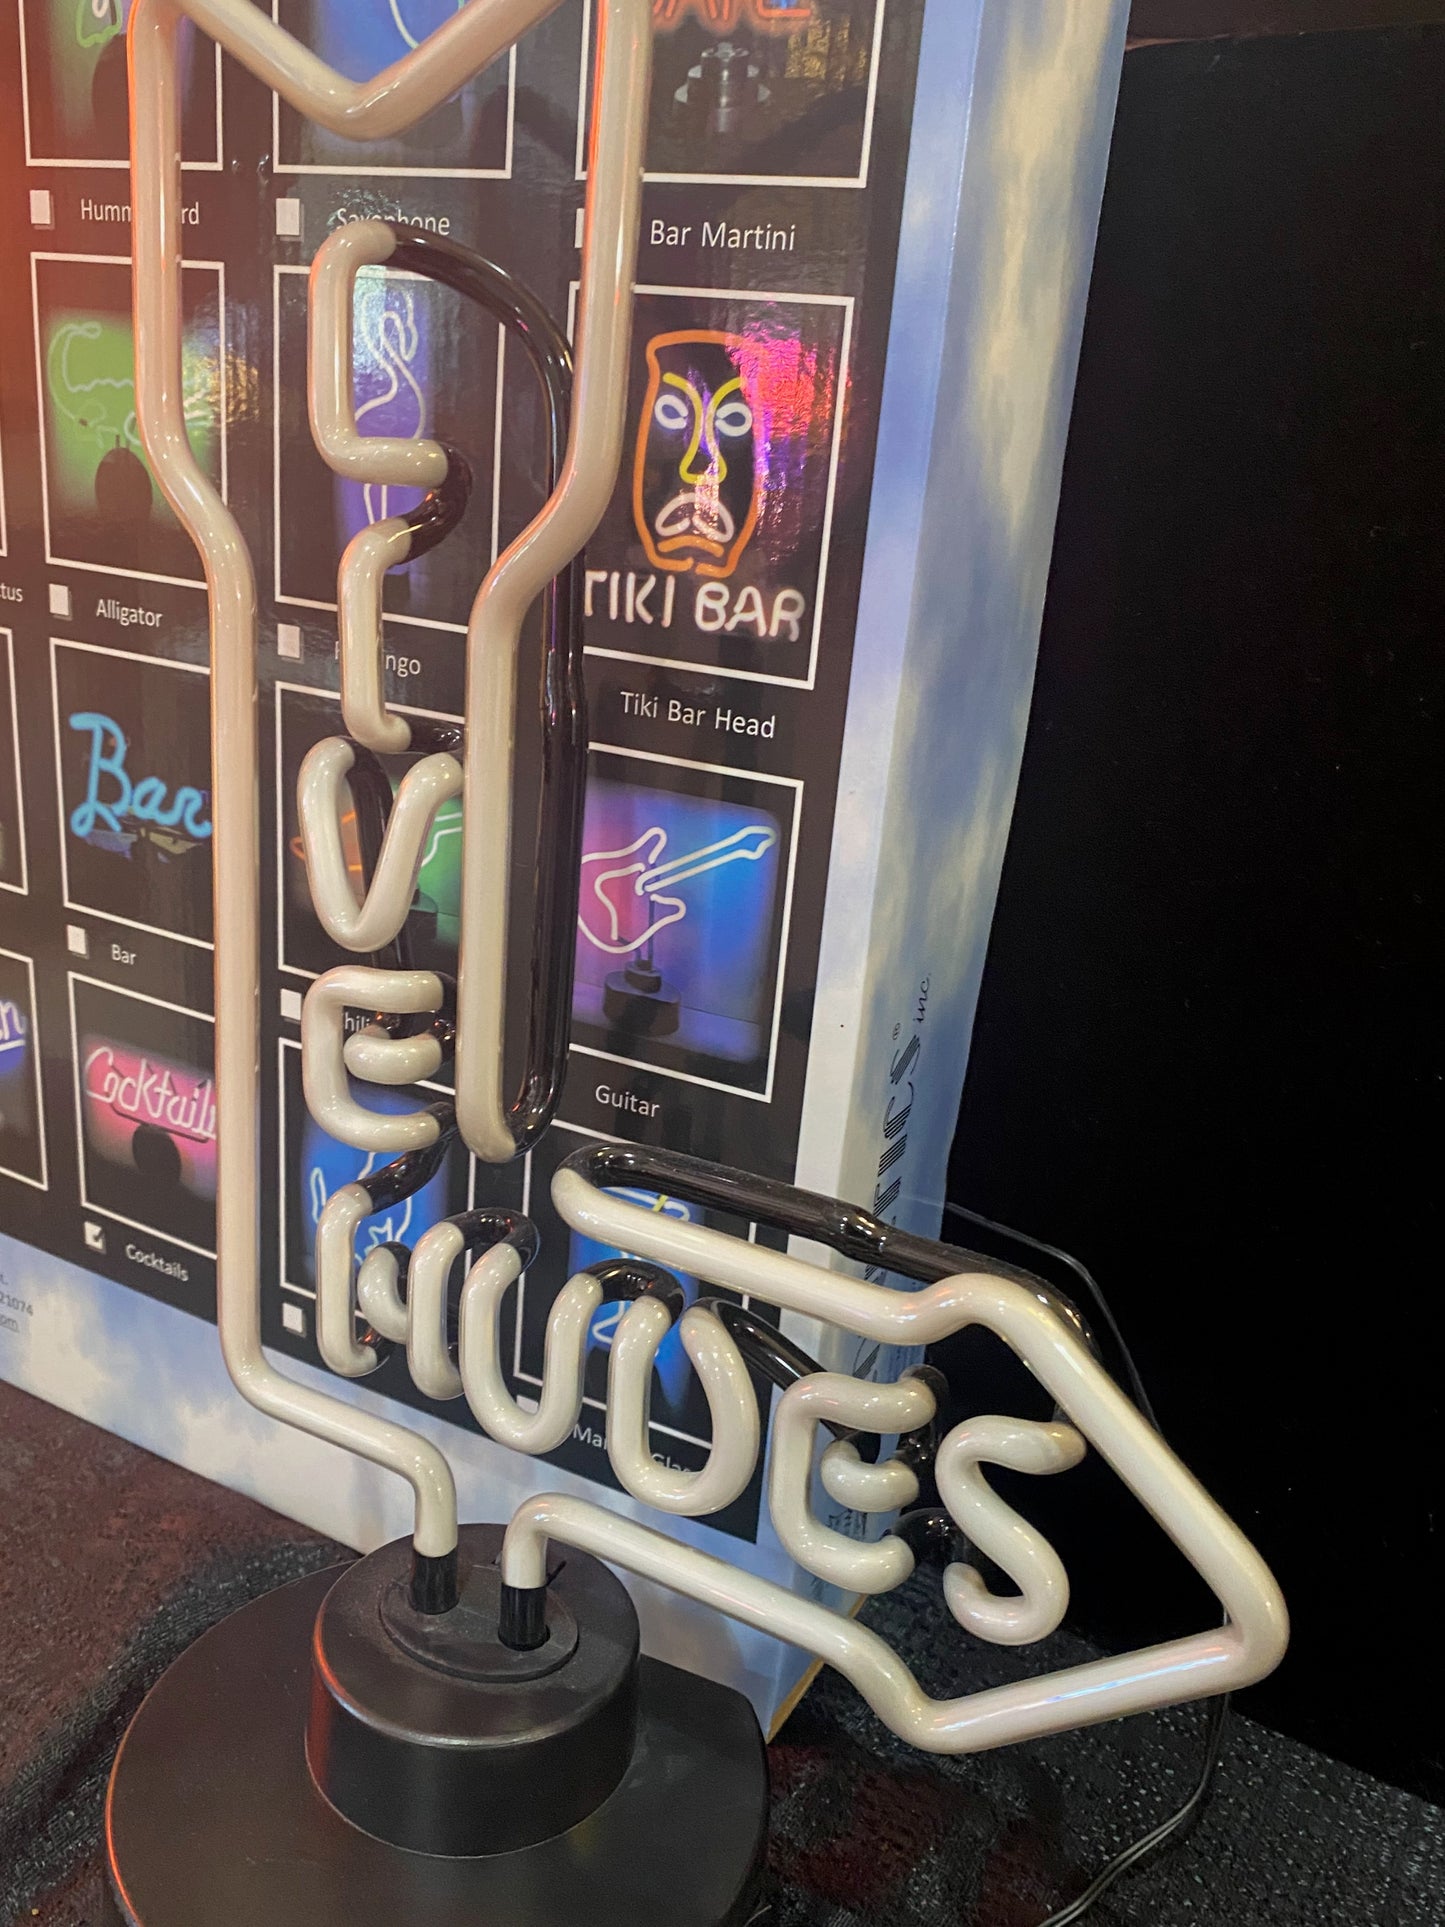 Live Nudes Neon Sculpture *LOCAL PICKUP ONLY*